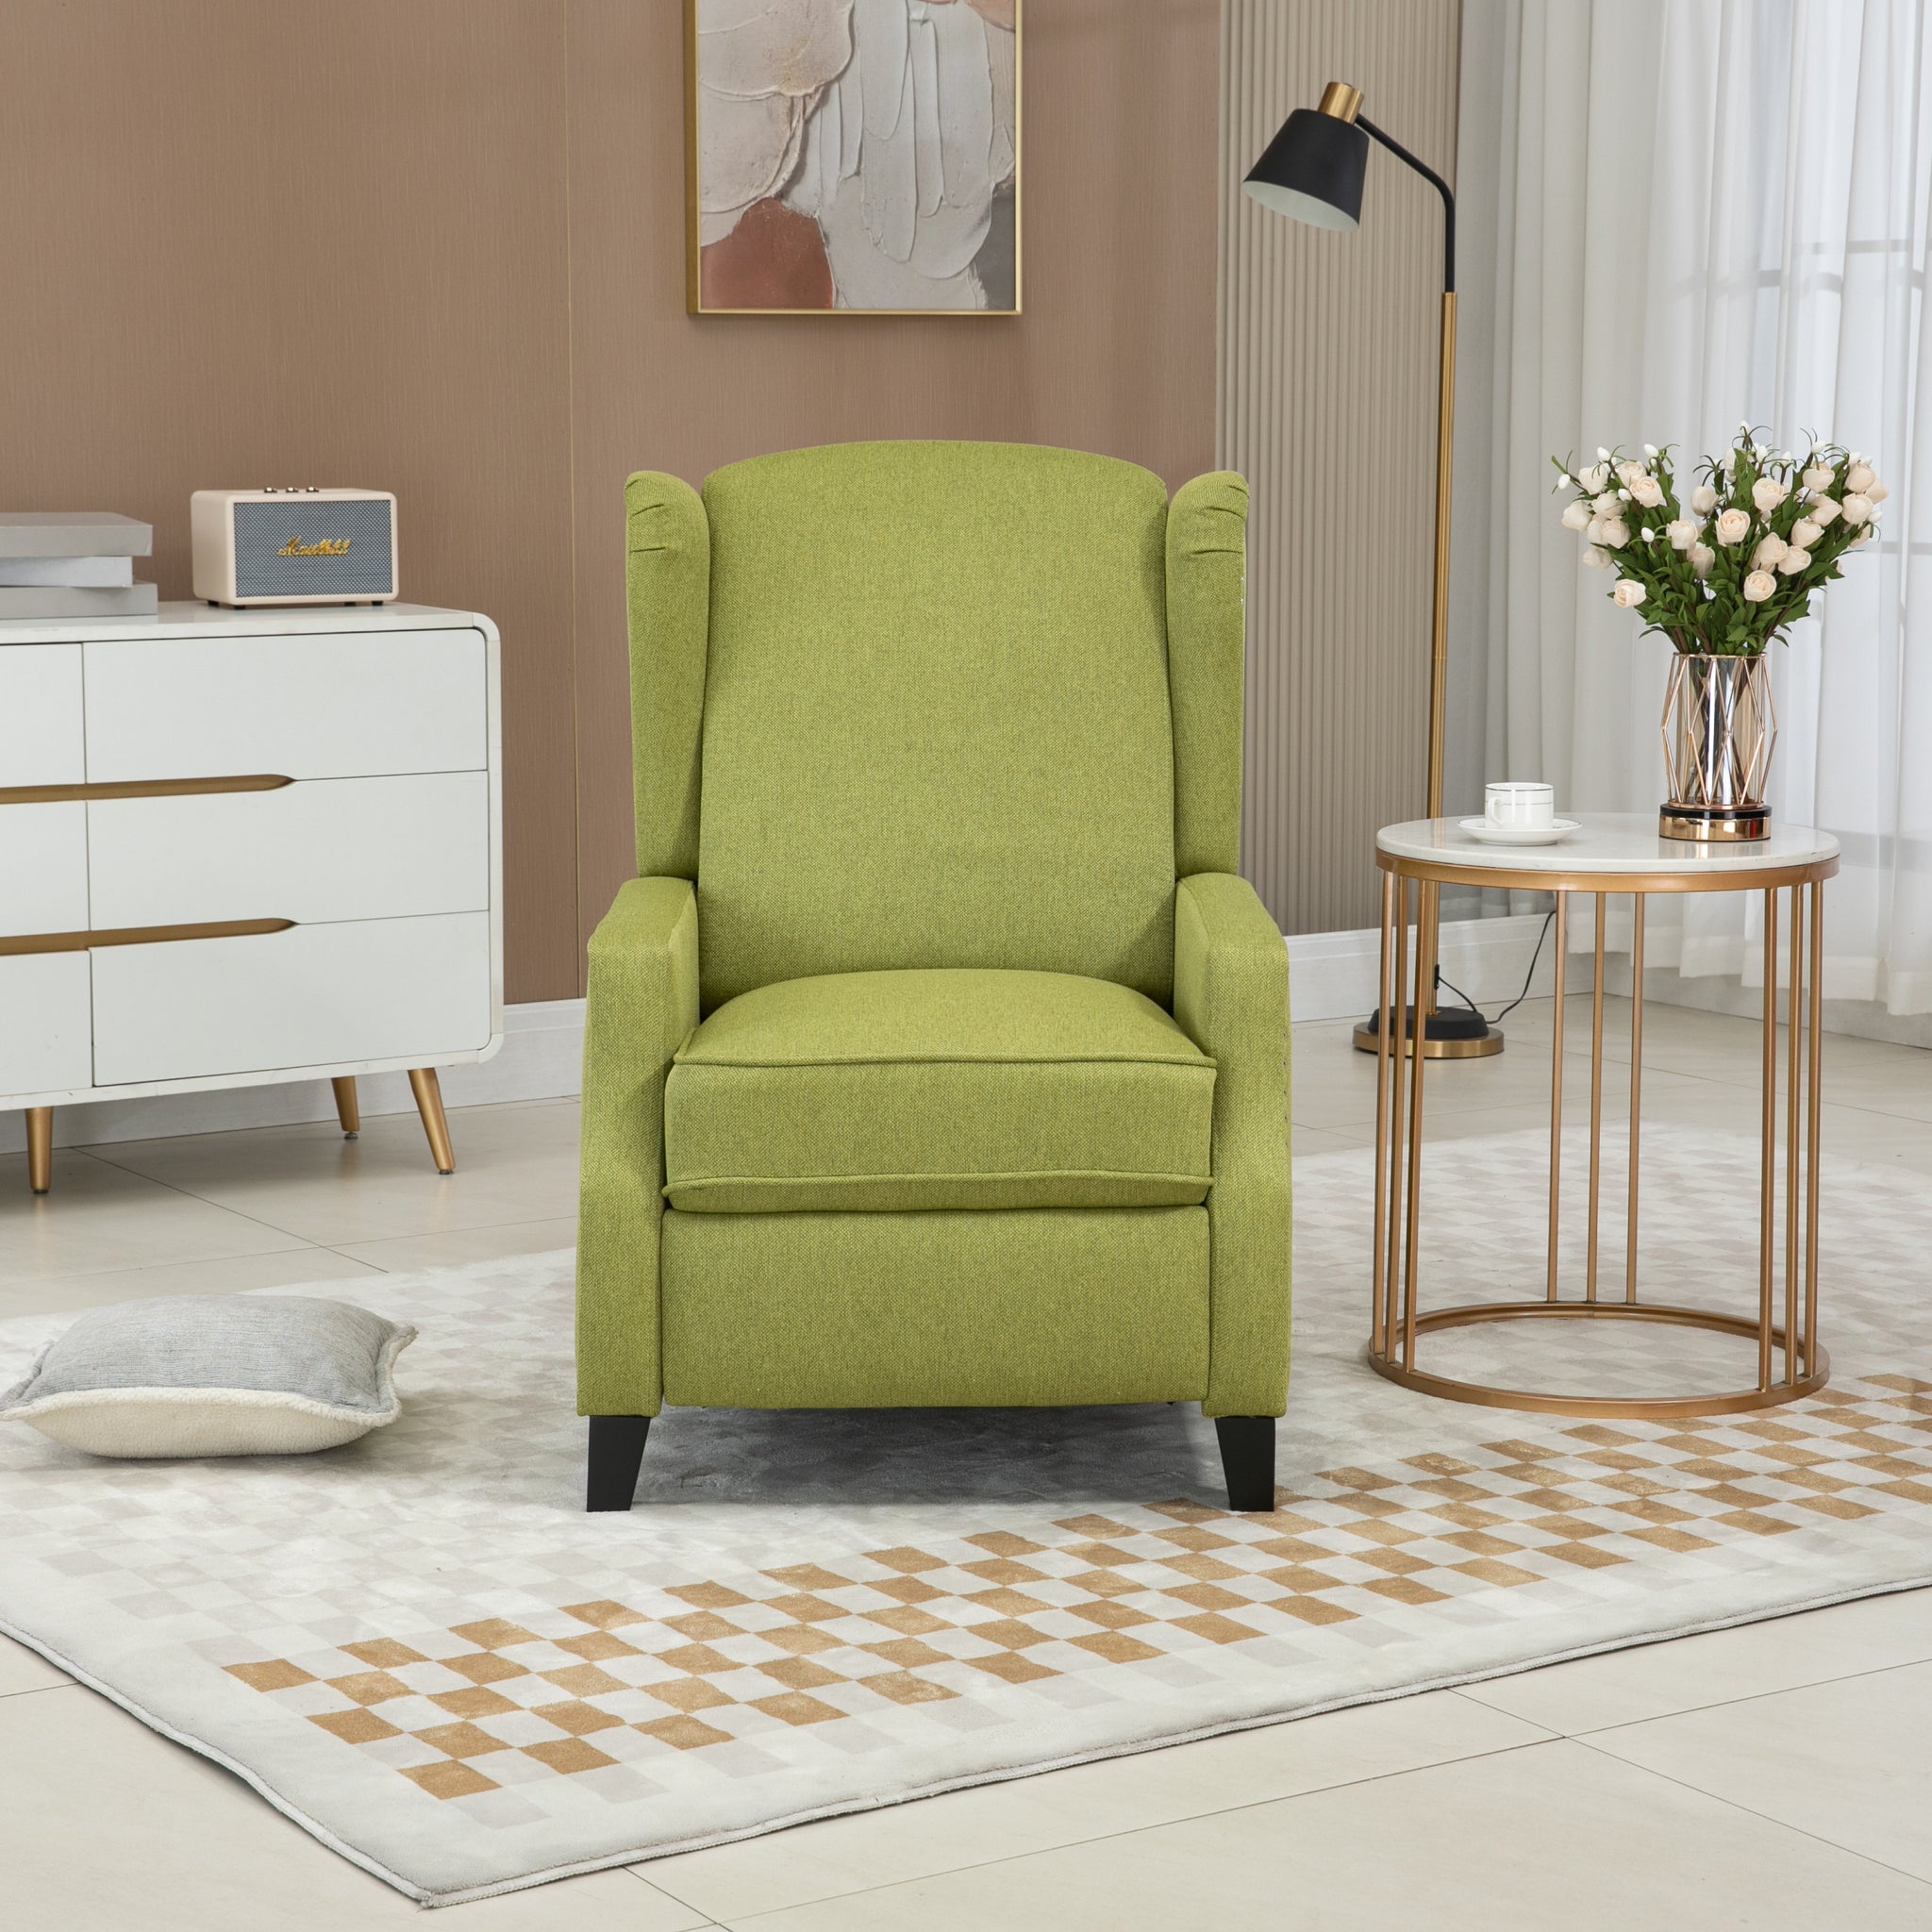 COOLMORE Modern Comfortable Upholstered leisure chair olive green-linen